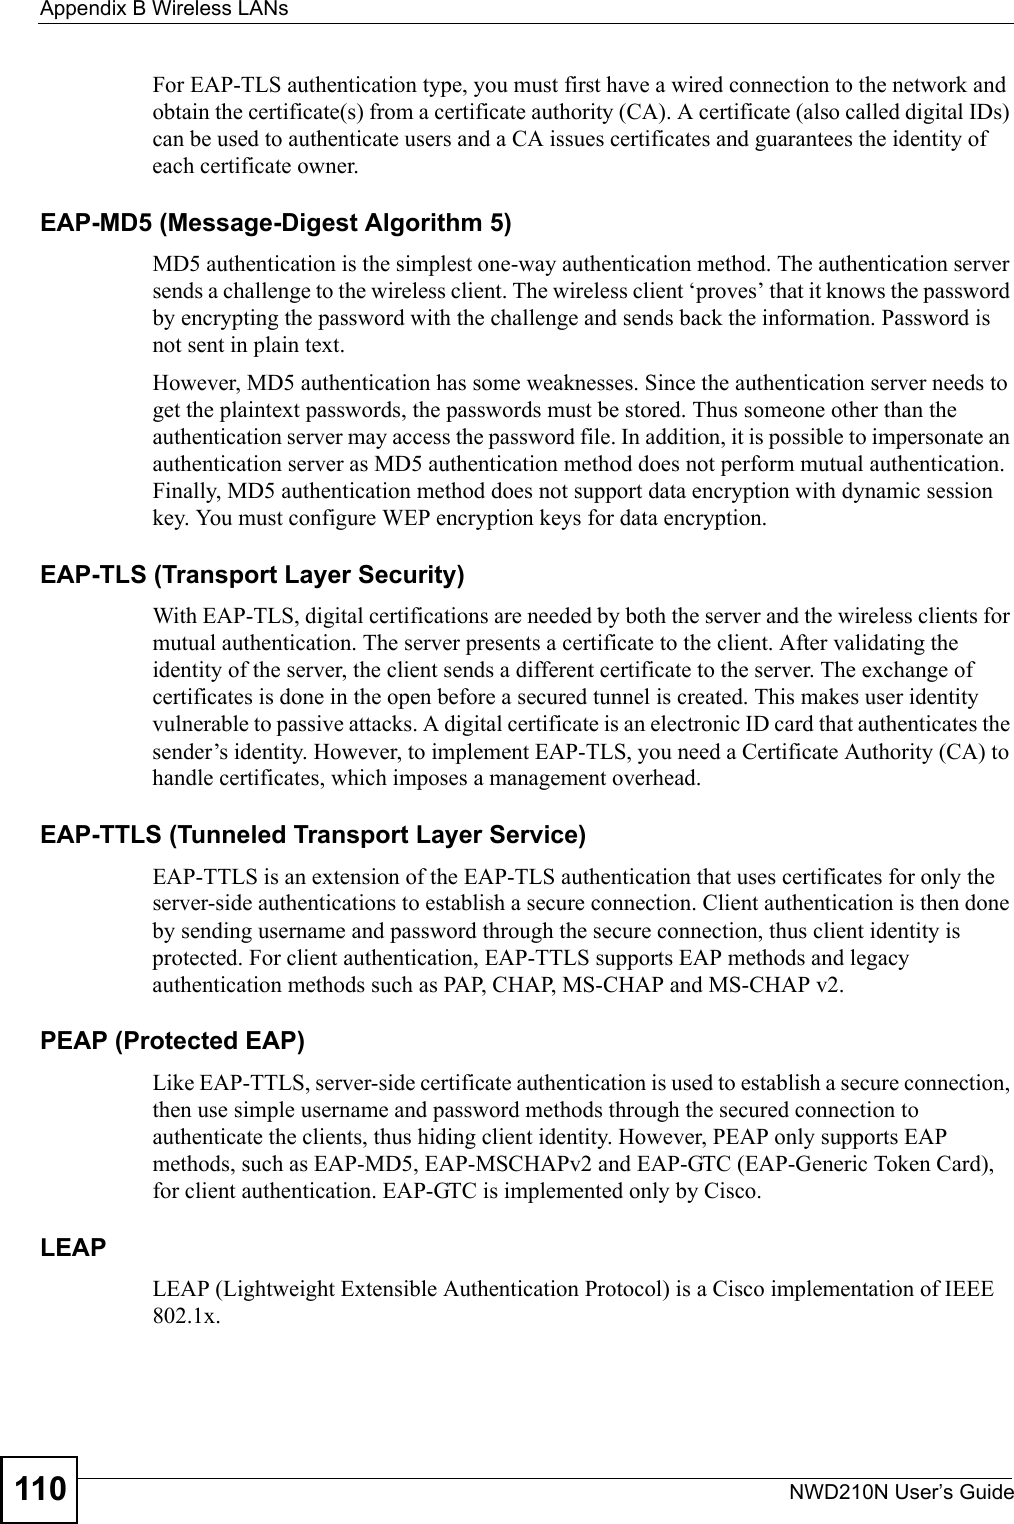 Appendix B Wireless LANsNWD210N User’s Guide110For EAP-TLS authentication type, you must first have a wired connection to the network and obtain the certificate(s) from a certificate authority (CA). A certificate (also called digital IDs) can be used to authenticate users and a CA issues certificates and guarantees the identity of each certificate owner.EAP-MD5 (Message-Digest Algorithm 5)MD5 authentication is the simplest one-way authentication method. The authentication server sends a challenge to the wireless client. The wireless client ‘proves’ that it knows the password by encrypting the password with the challenge and sends back the information. Password is not sent in plain text. However, MD5 authentication has some weaknesses. Since the authentication server needs to get the plaintext passwords, the passwords must be stored. Thus someone other than the authentication server may access the password file. In addition, it is possible to impersonate an authentication server as MD5 authentication method does not perform mutual authentication. Finally, MD5 authentication method does not support data encryption with dynamic session key. You must configure WEP encryption keys for data encryption. EAP-TLS (Transport Layer Security)With EAP-TLS, digital certifications are needed by both the server and the wireless clients for mutual authentication. The server presents a certificate to the client. After validating the identity of the server, the client sends a different certificate to the server. The exchange of certificates is done in the open before a secured tunnel is created. This makes user identity vulnerable to passive attacks. A digital certificate is an electronic ID card that authenticates the sender’s identity. However, to implement EAP-TLS, you need a Certificate Authority (CA) to handle certificates, which imposes a management overhead. EAP-TTLS (Tunneled Transport Layer Service) EAP-TTLS is an extension of the EAP-TLS authentication that uses certificates for only the server-side authentications to establish a secure connection. Client authentication is then done by sending username and password through the secure connection, thus client identity is protected. For client authentication, EAP-TTLS supports EAP methods and legacy authentication methods such as PAP, CHAP, MS-CHAP and MS-CHAP v2. PEAP (Protected EAP)   Like EAP-TTLS, server-side certificate authentication is used to establish a secure connection, then use simple username and password methods through the secured connection to authenticate the clients, thus hiding client identity. However, PEAP only supports EAP methods, such as EAP-MD5, EAP-MSCHAPv2 and EAP-GTC (EAP-Generic Token Card), for client authentication. EAP-GTC is implemented only by Cisco.LEAPLEAP (Lightweight Extensible Authentication Protocol) is a Cisco implementation of IEEE 802.1x. 